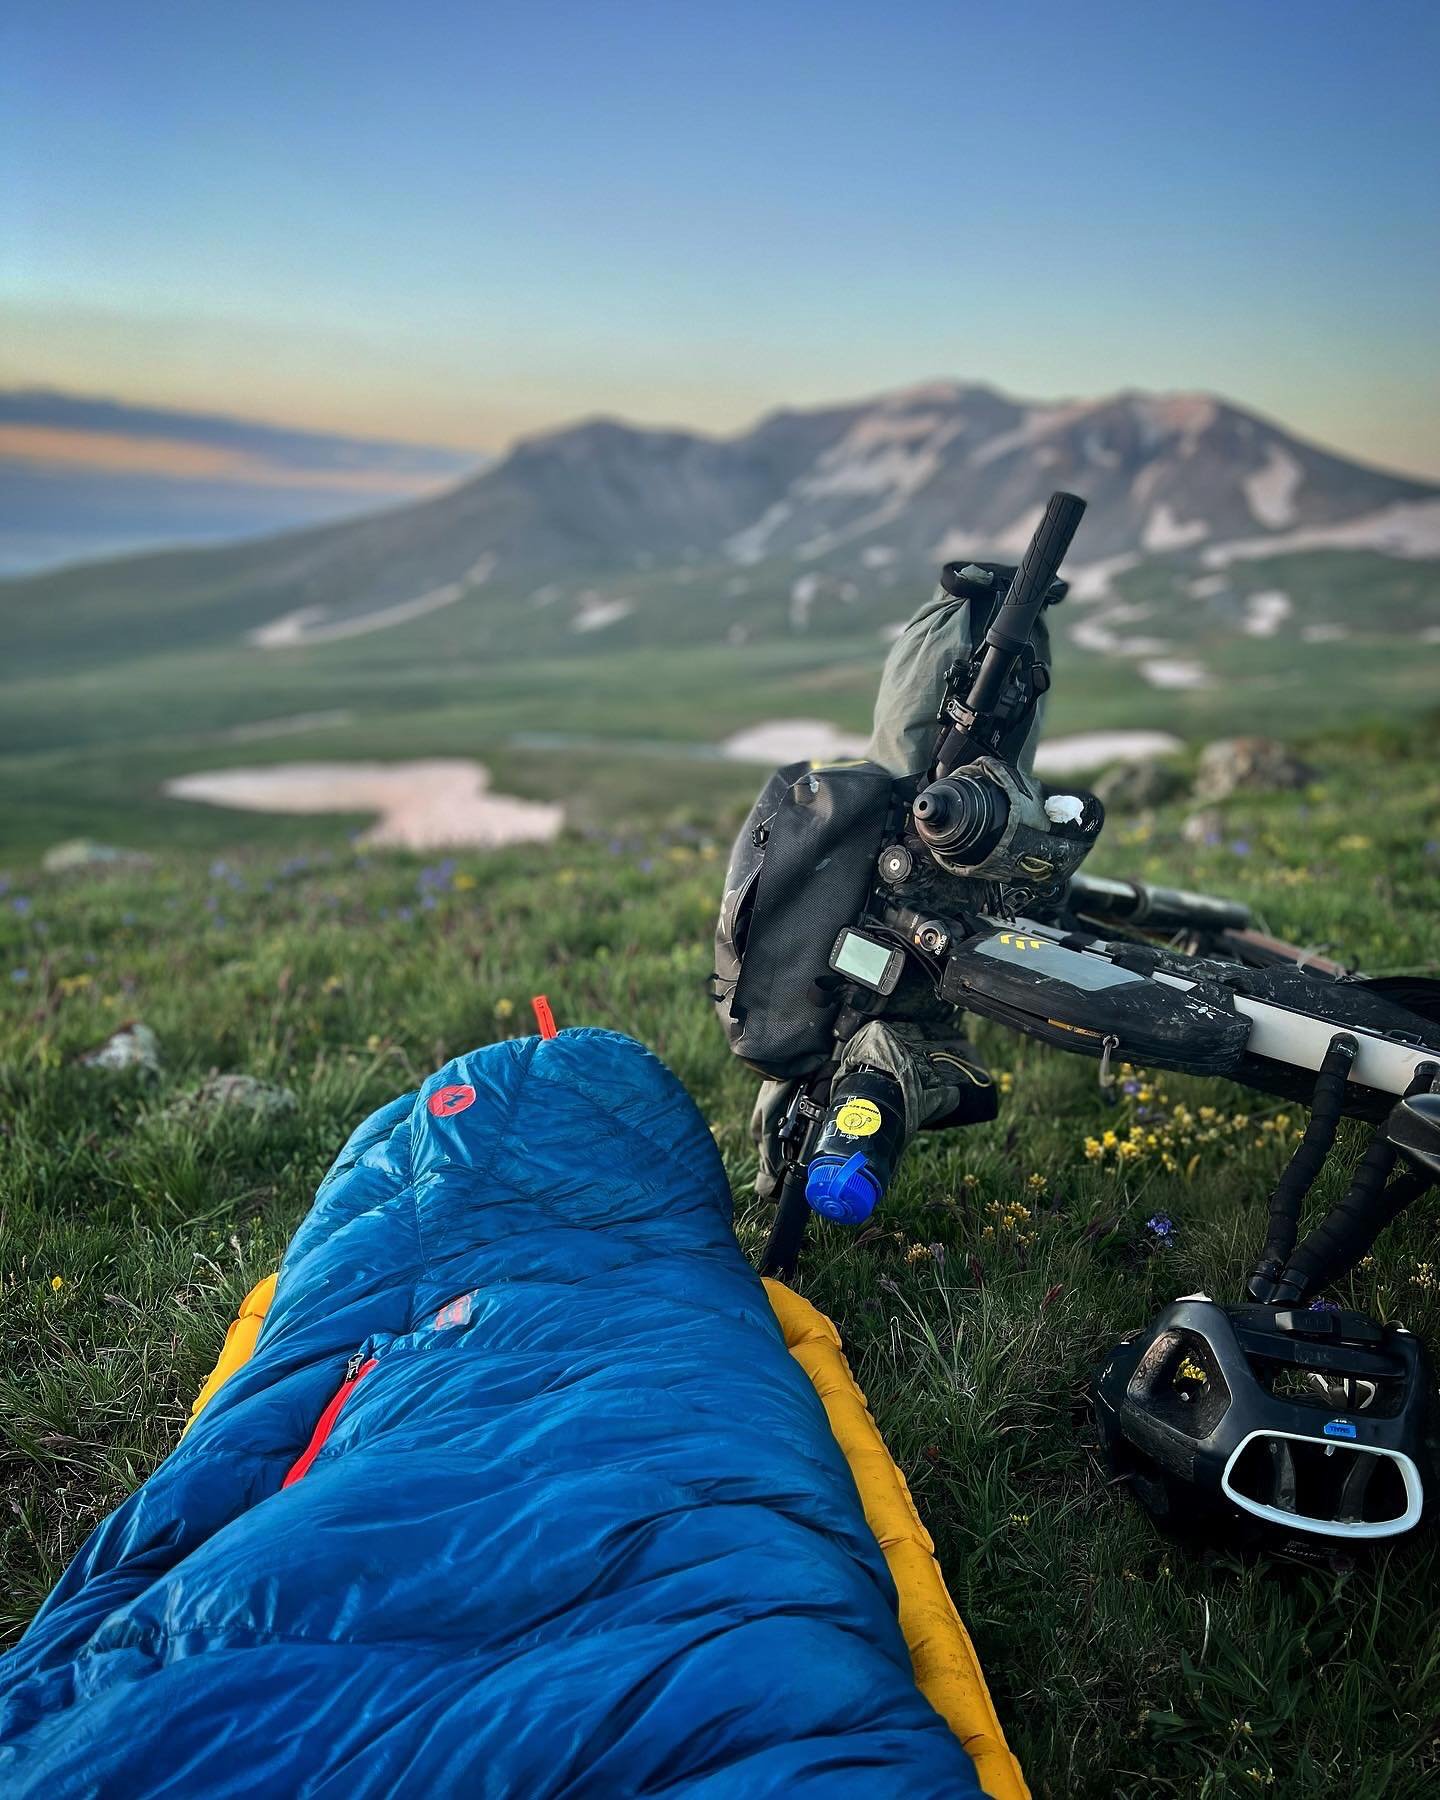 Bivvy season is coming! There are few things that enrich my soul as much as a night under the stars in the mountains. With the days getting longer and the nights almost getting warmer, I&rsquo;m really looking forward to some bivvy magic!
Who&rsquo;s